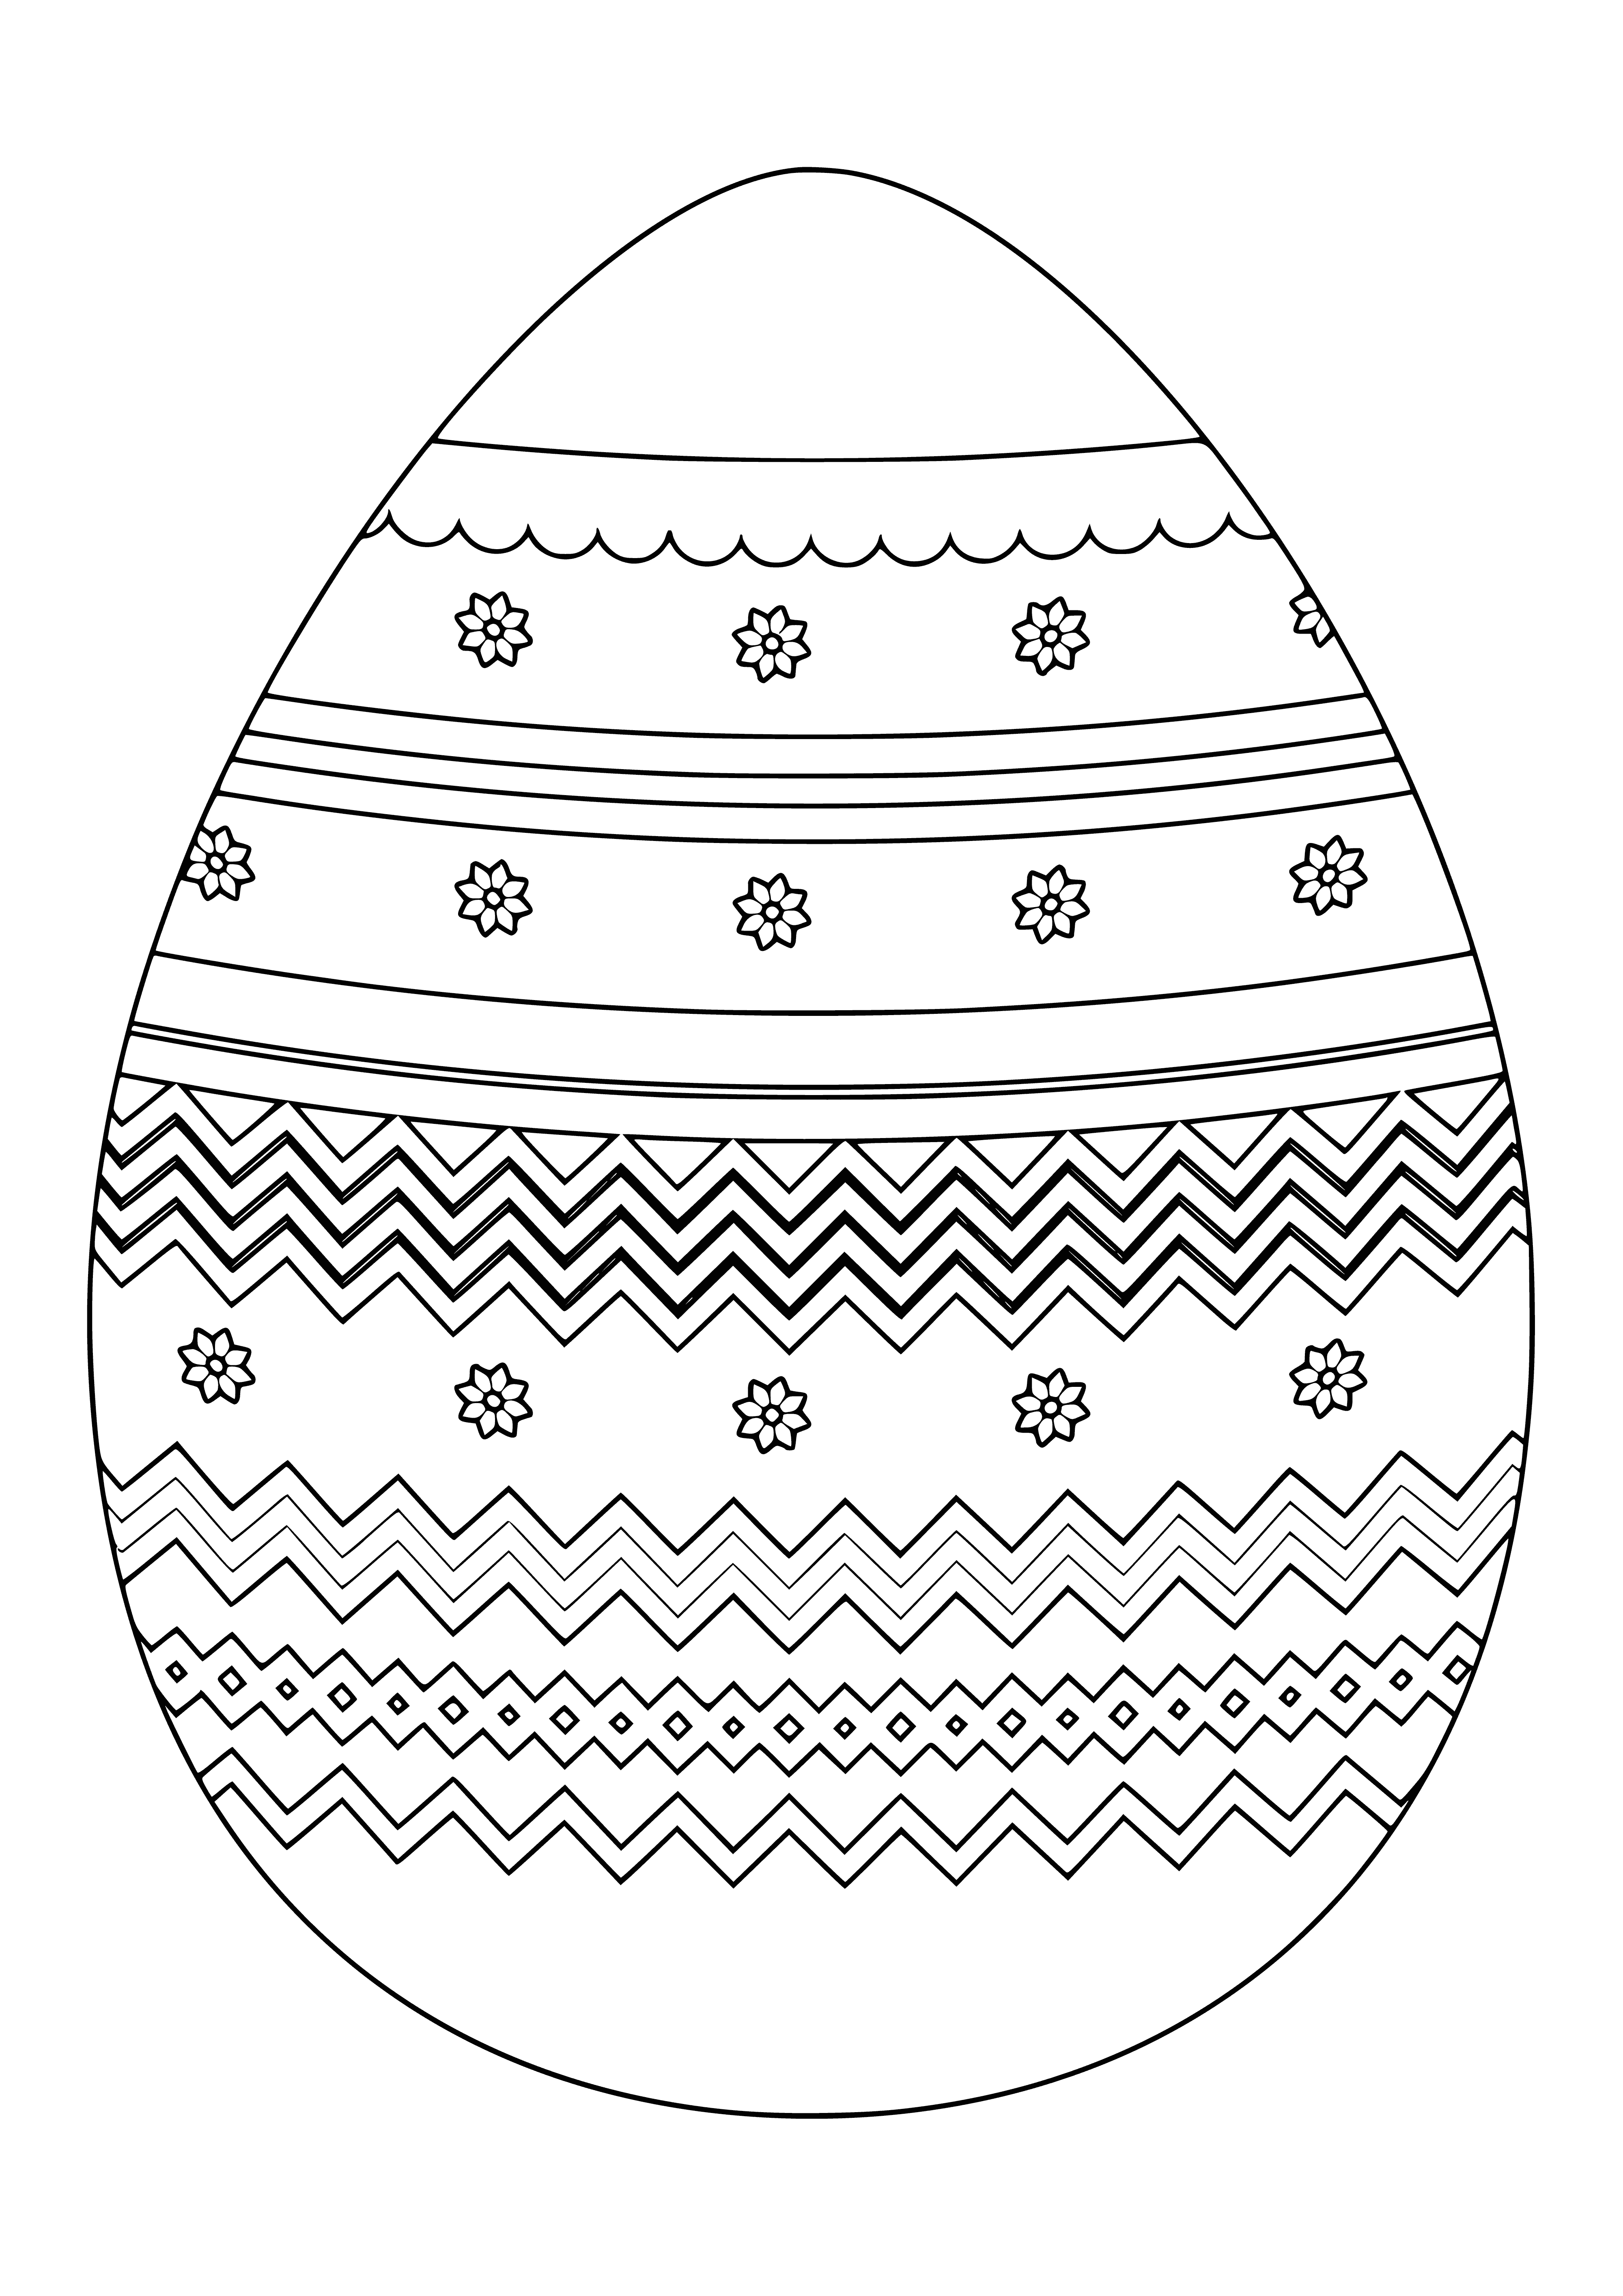 coloring page: Easter eggs symbolize new life and are usually decorated with flowers, representing springtime and rebirth.